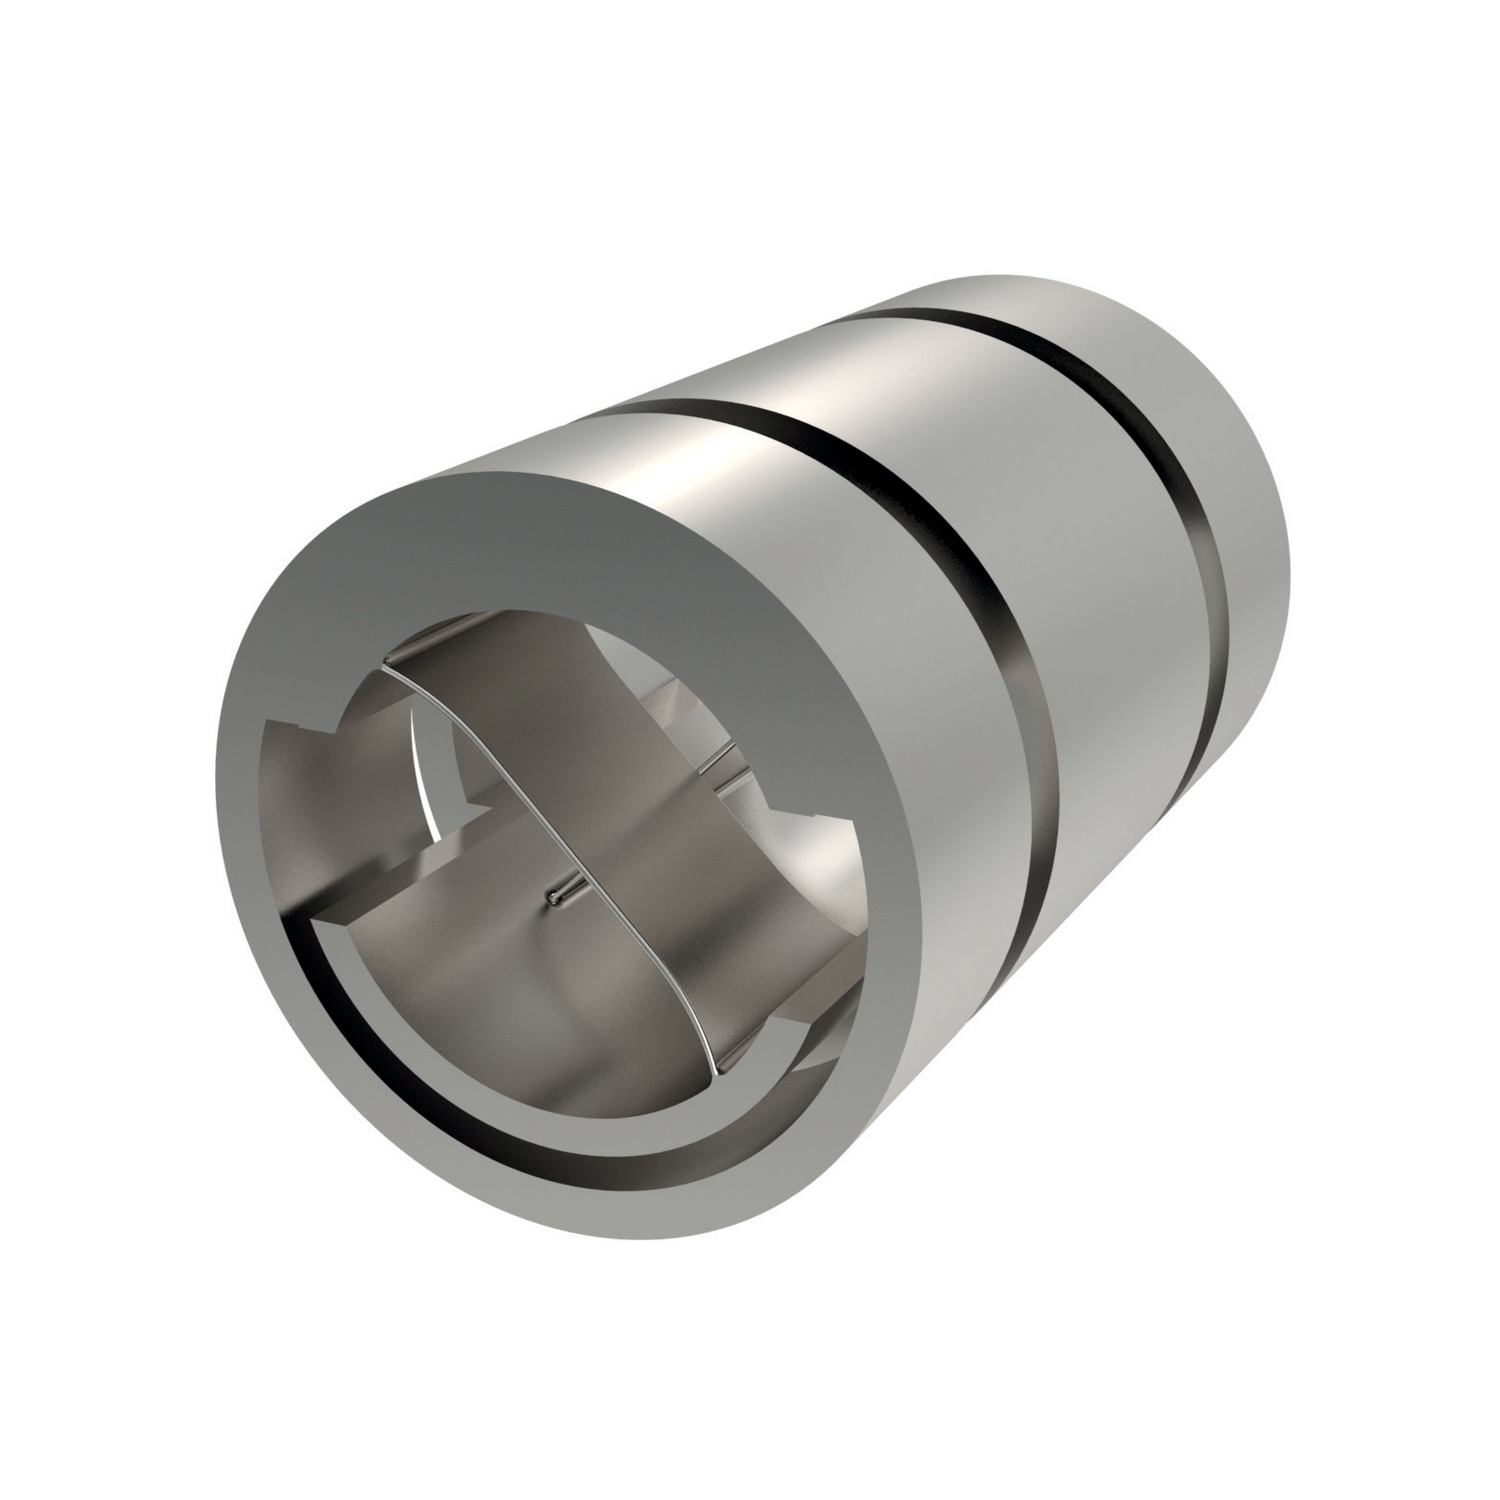 Flexure Pivot Bearings Double-ended flex pivot bearingsStainless steel with operating temperature from -35°C to +190°C.